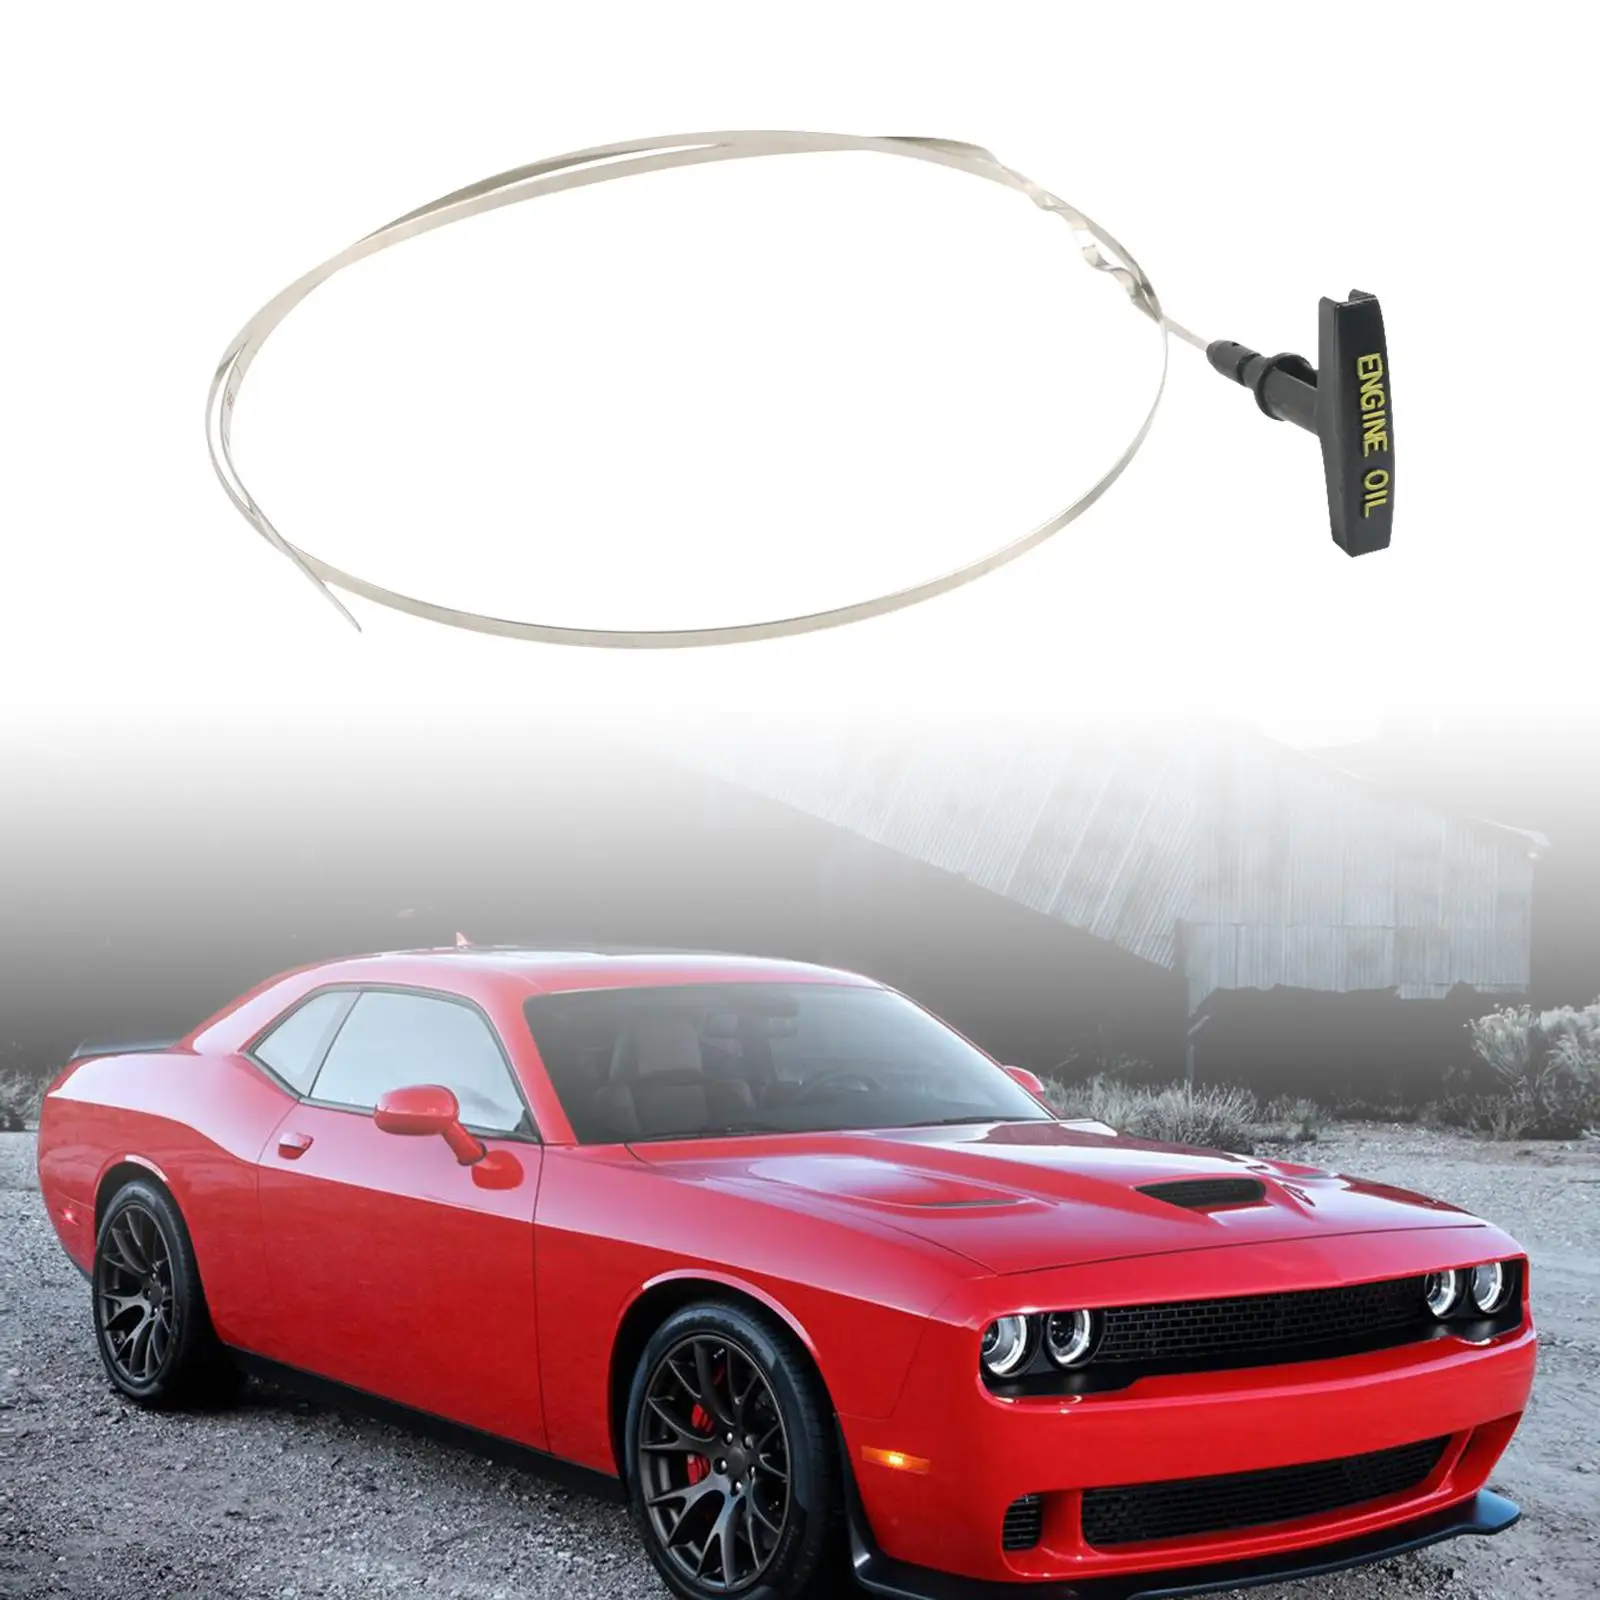 Engine Oil Dipstick Accessory Spare Parts Replacement Oil Dipstick Car Engine Oil Level Gauge Dipstick for Dodge RAM2500